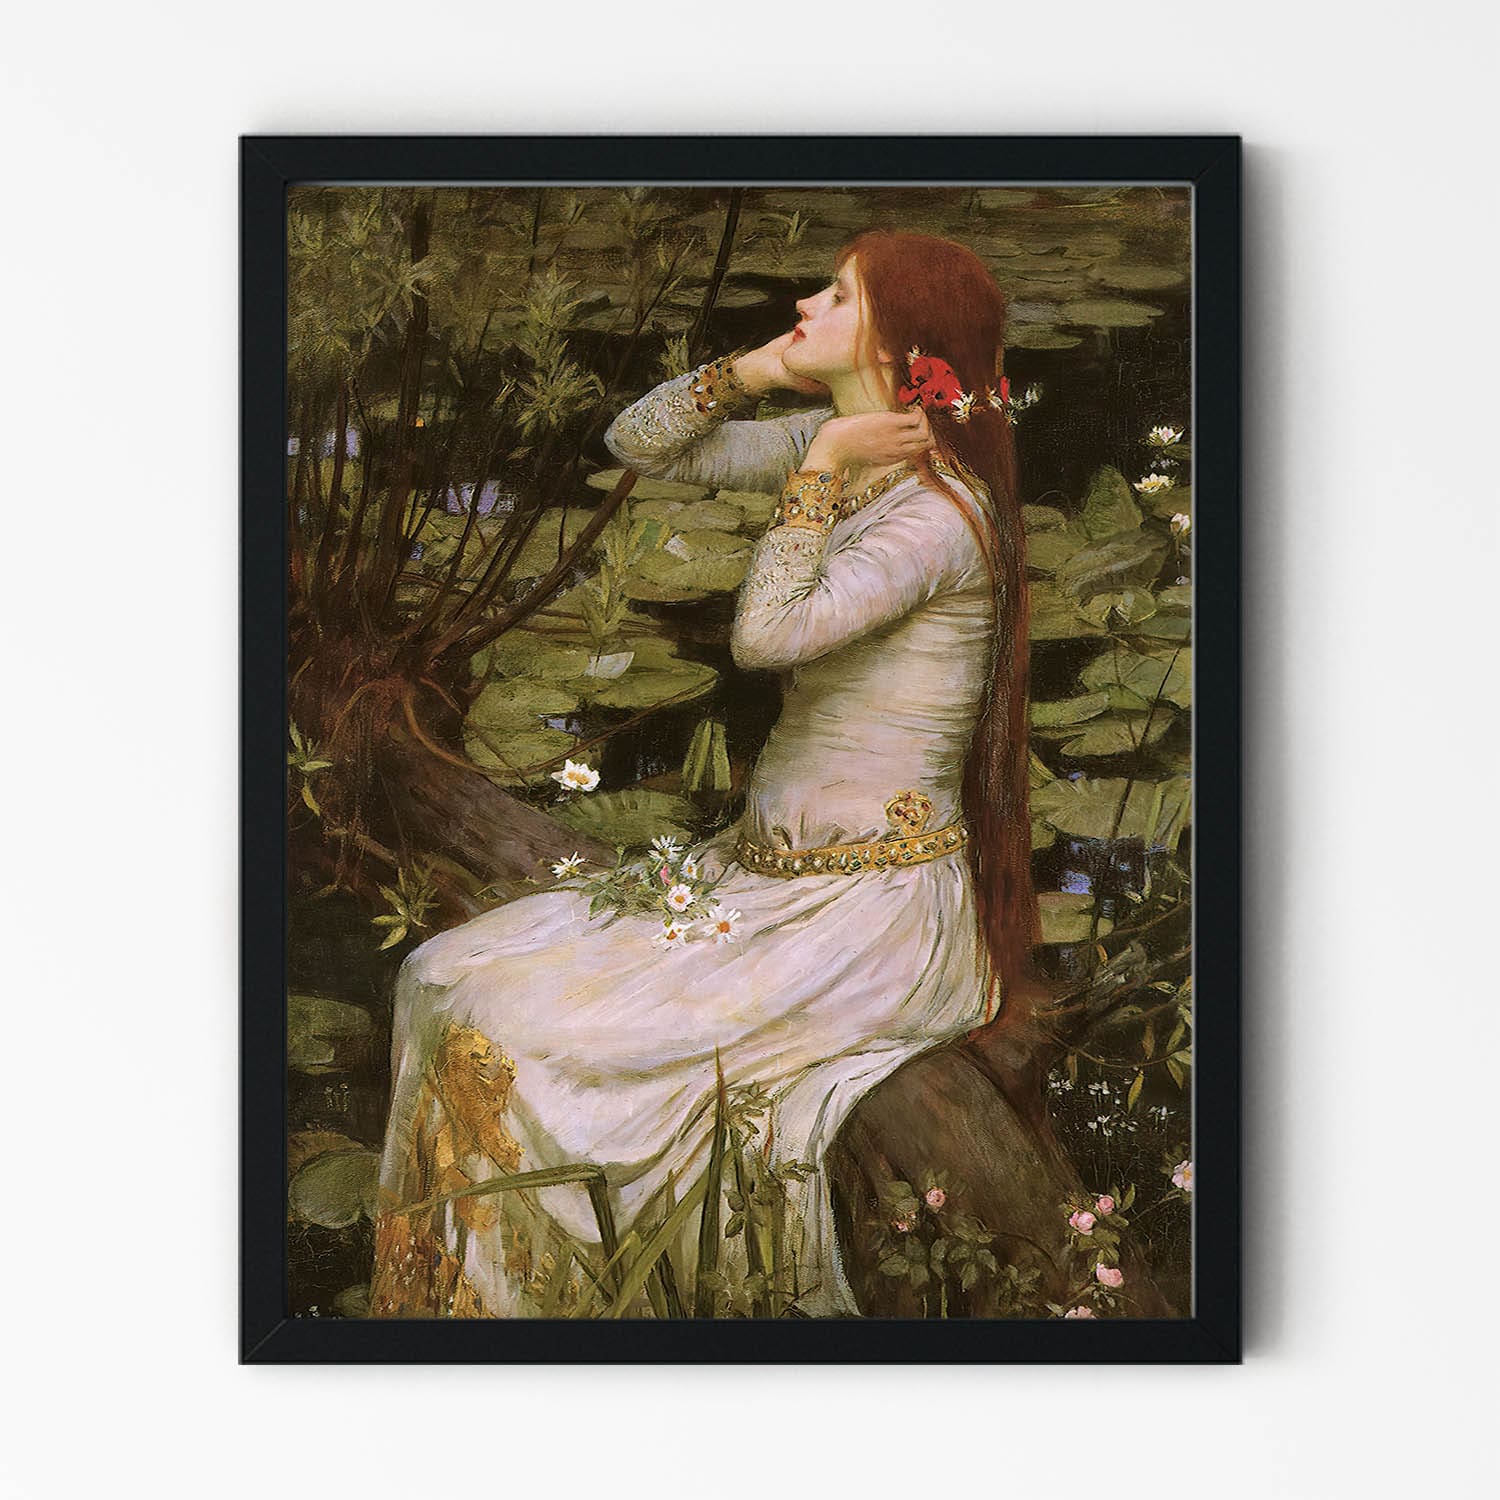 Girl with Red Hair and White Dress Painting in Black Picture Frame